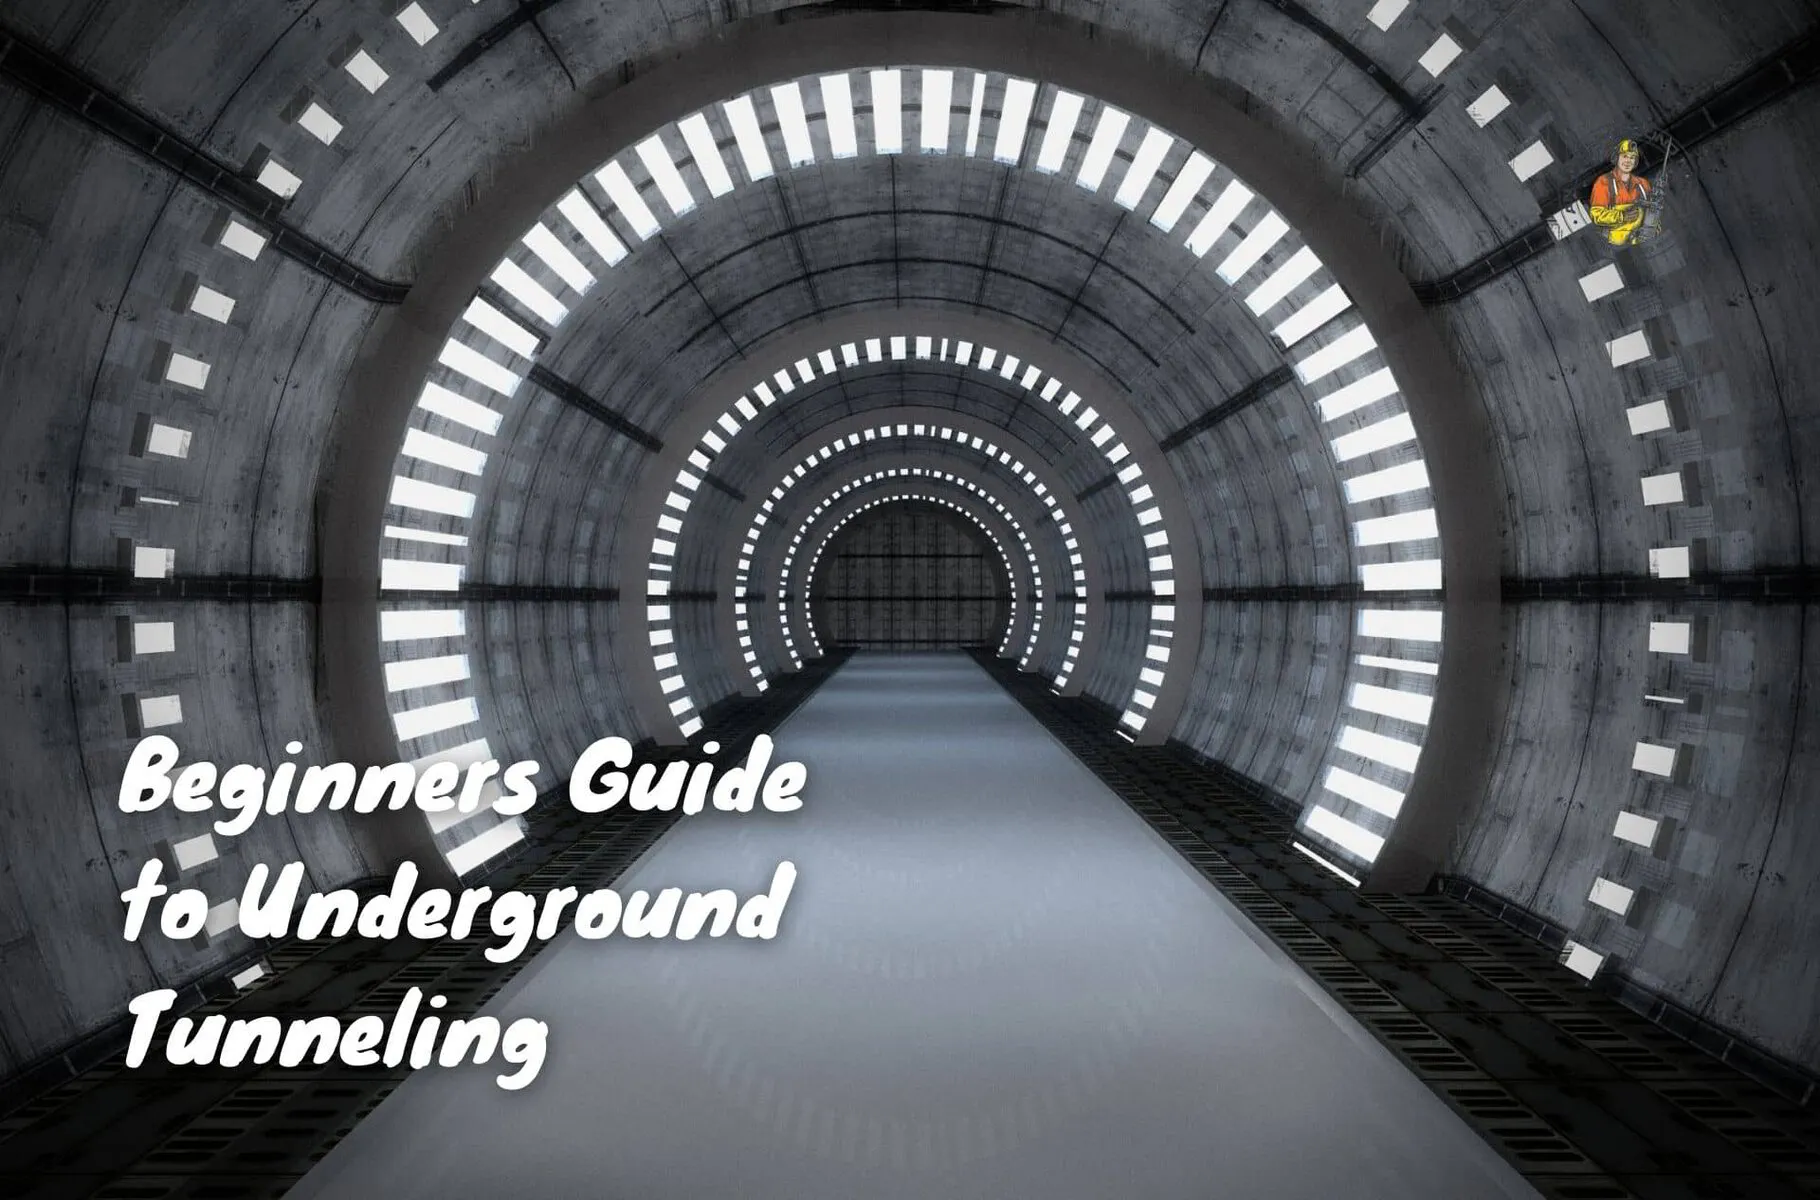 Beginners Guide to Underground Tunneling